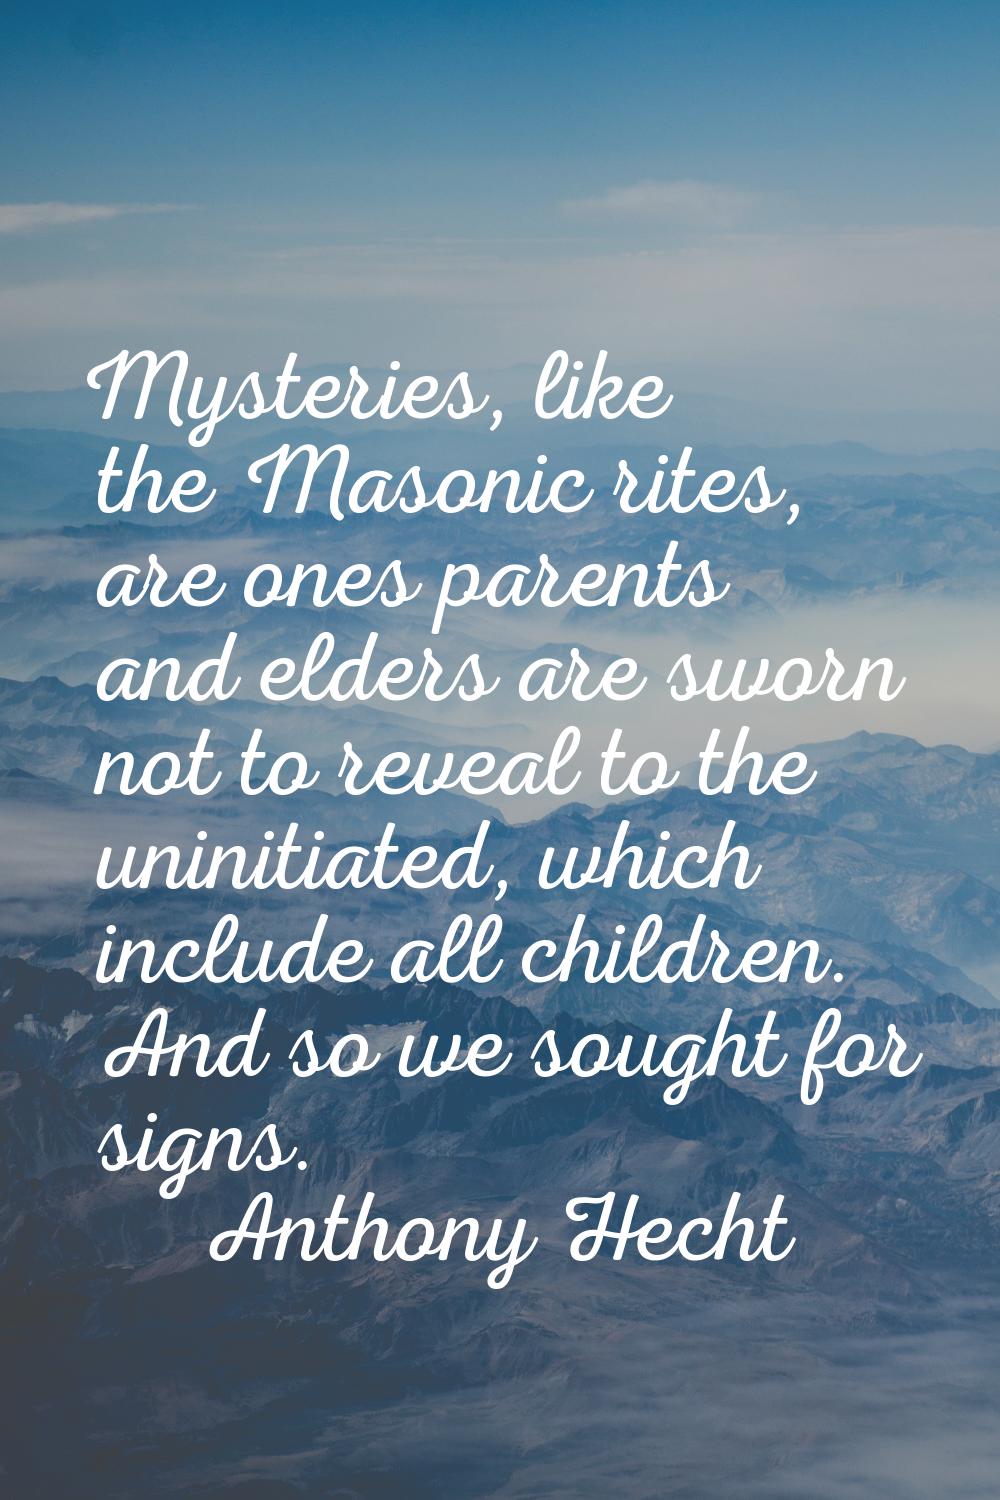 Mysteries, like the Masonic rites, are ones parents and elders are sworn not to reveal to the unini